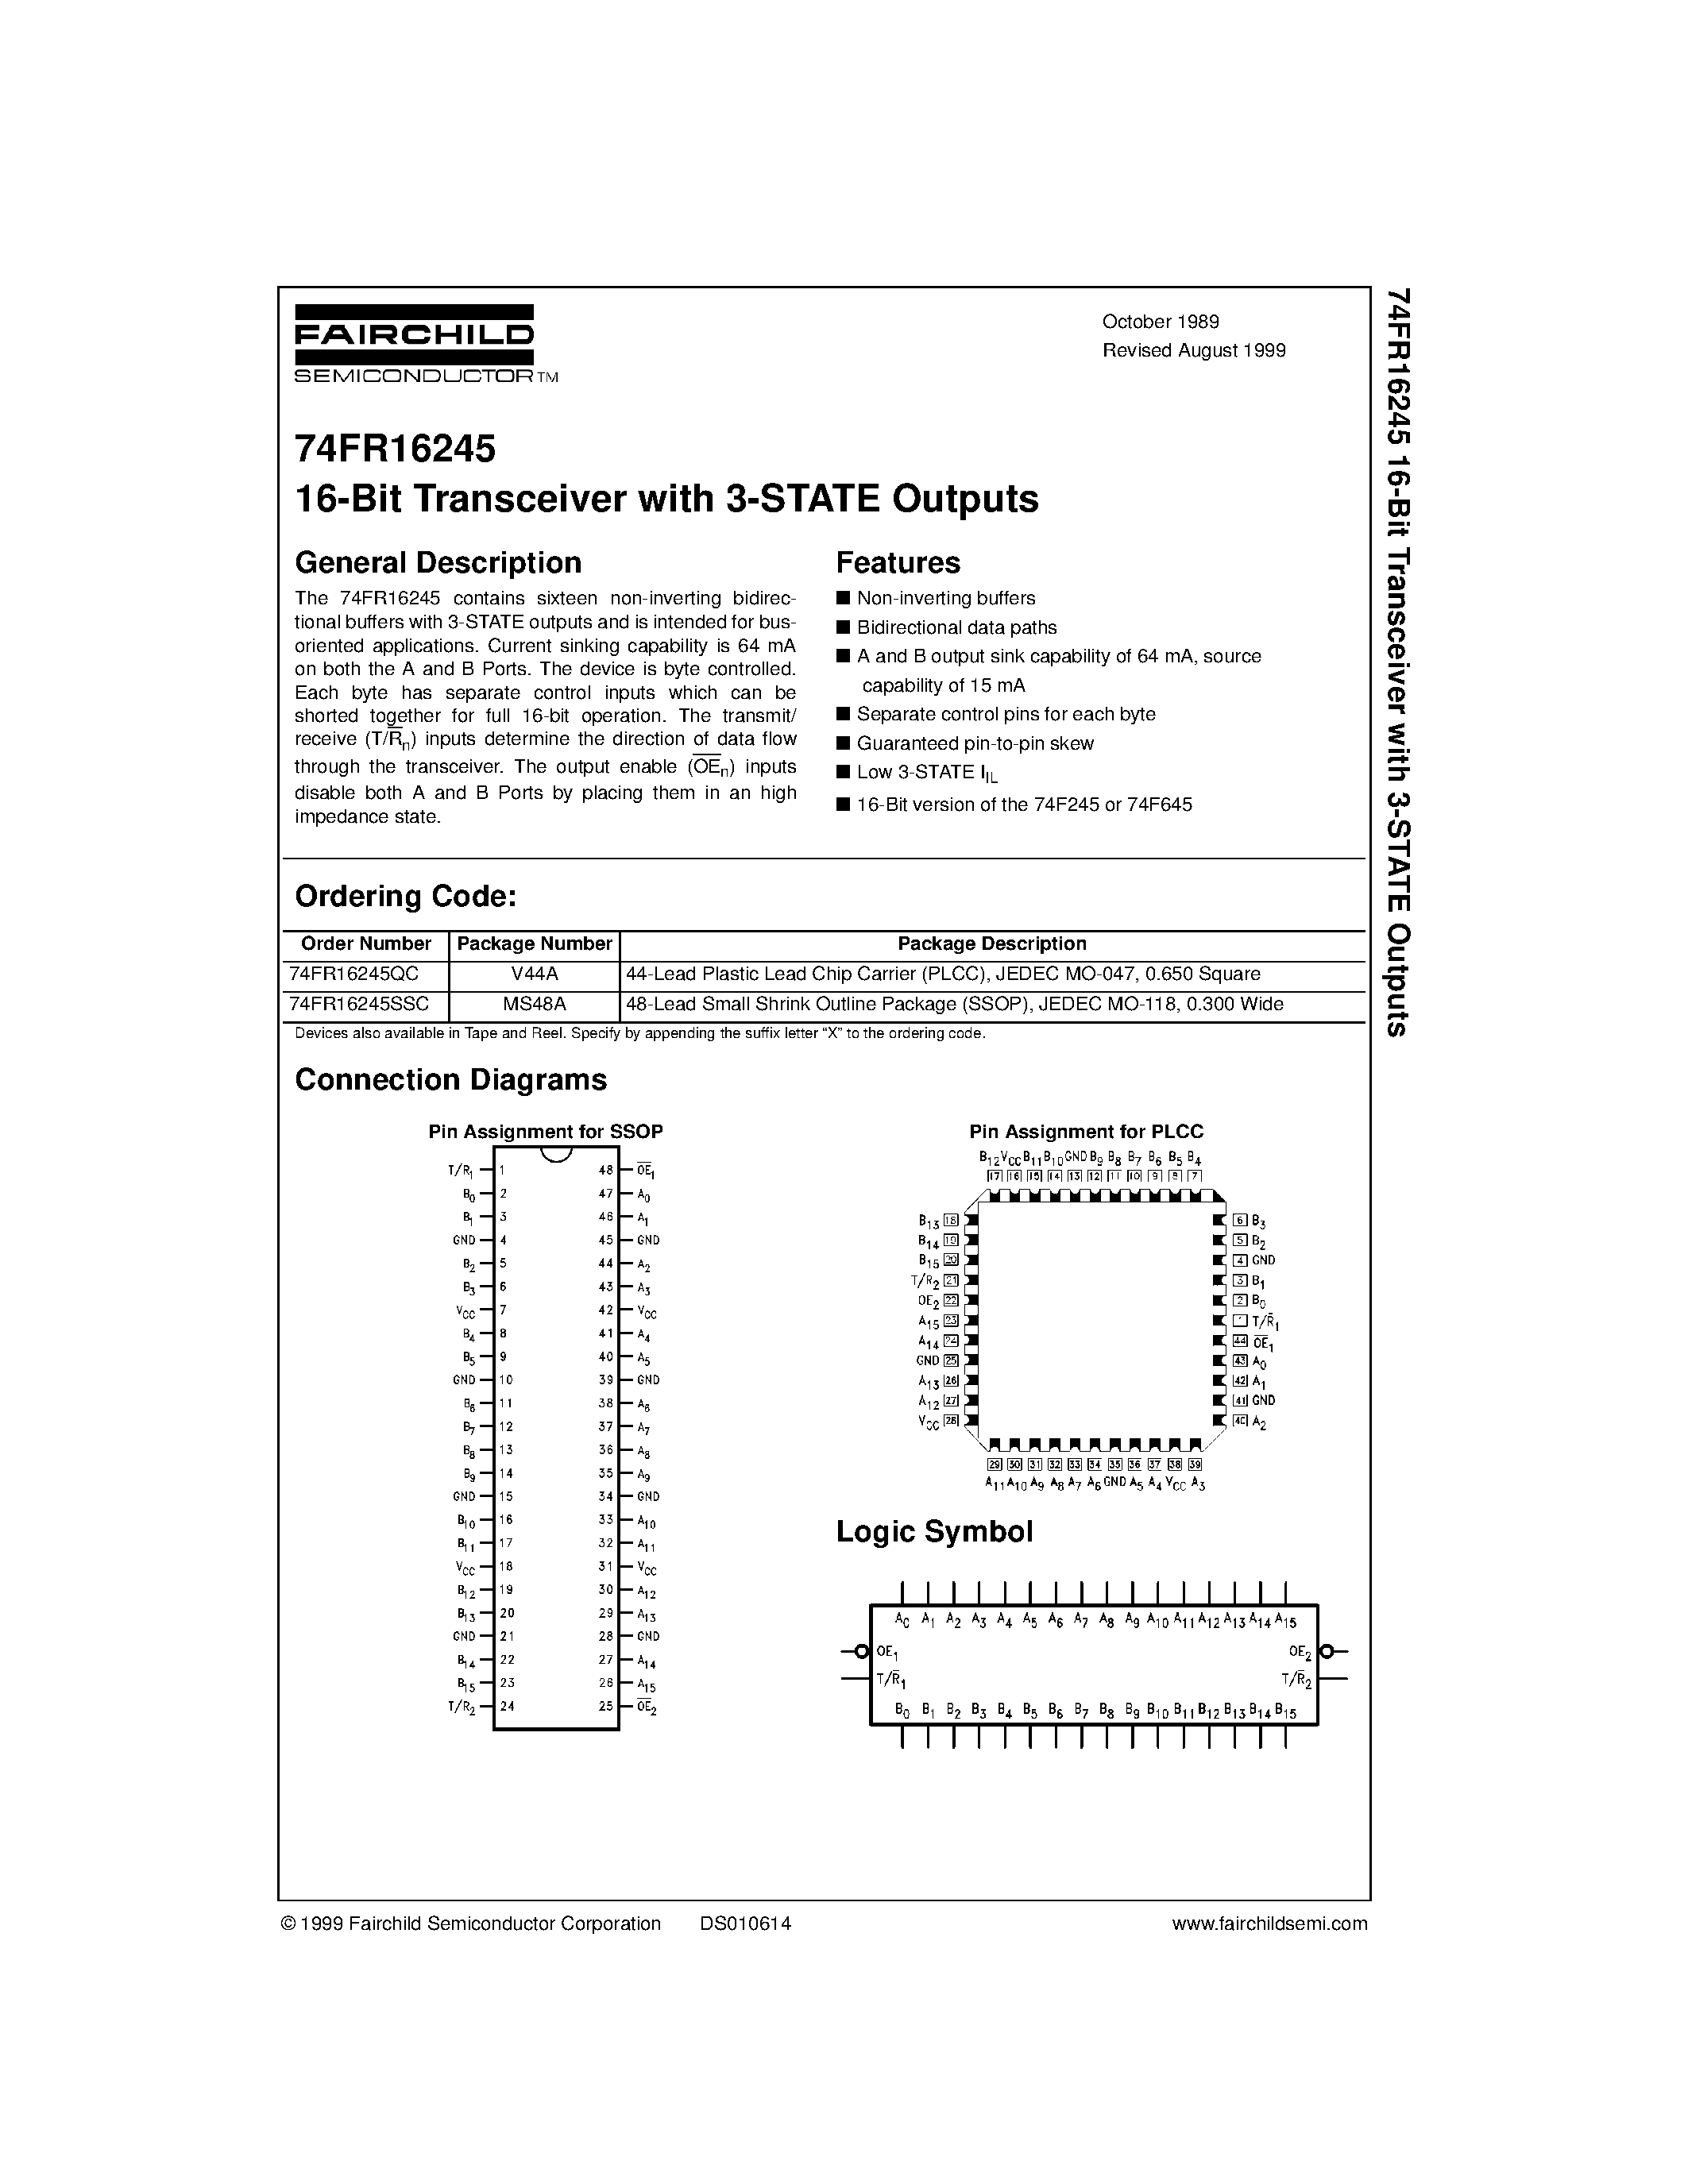 Datasheet 74FR16245 - 16-Bit Transceiver with 3-STATE Outputs page 1